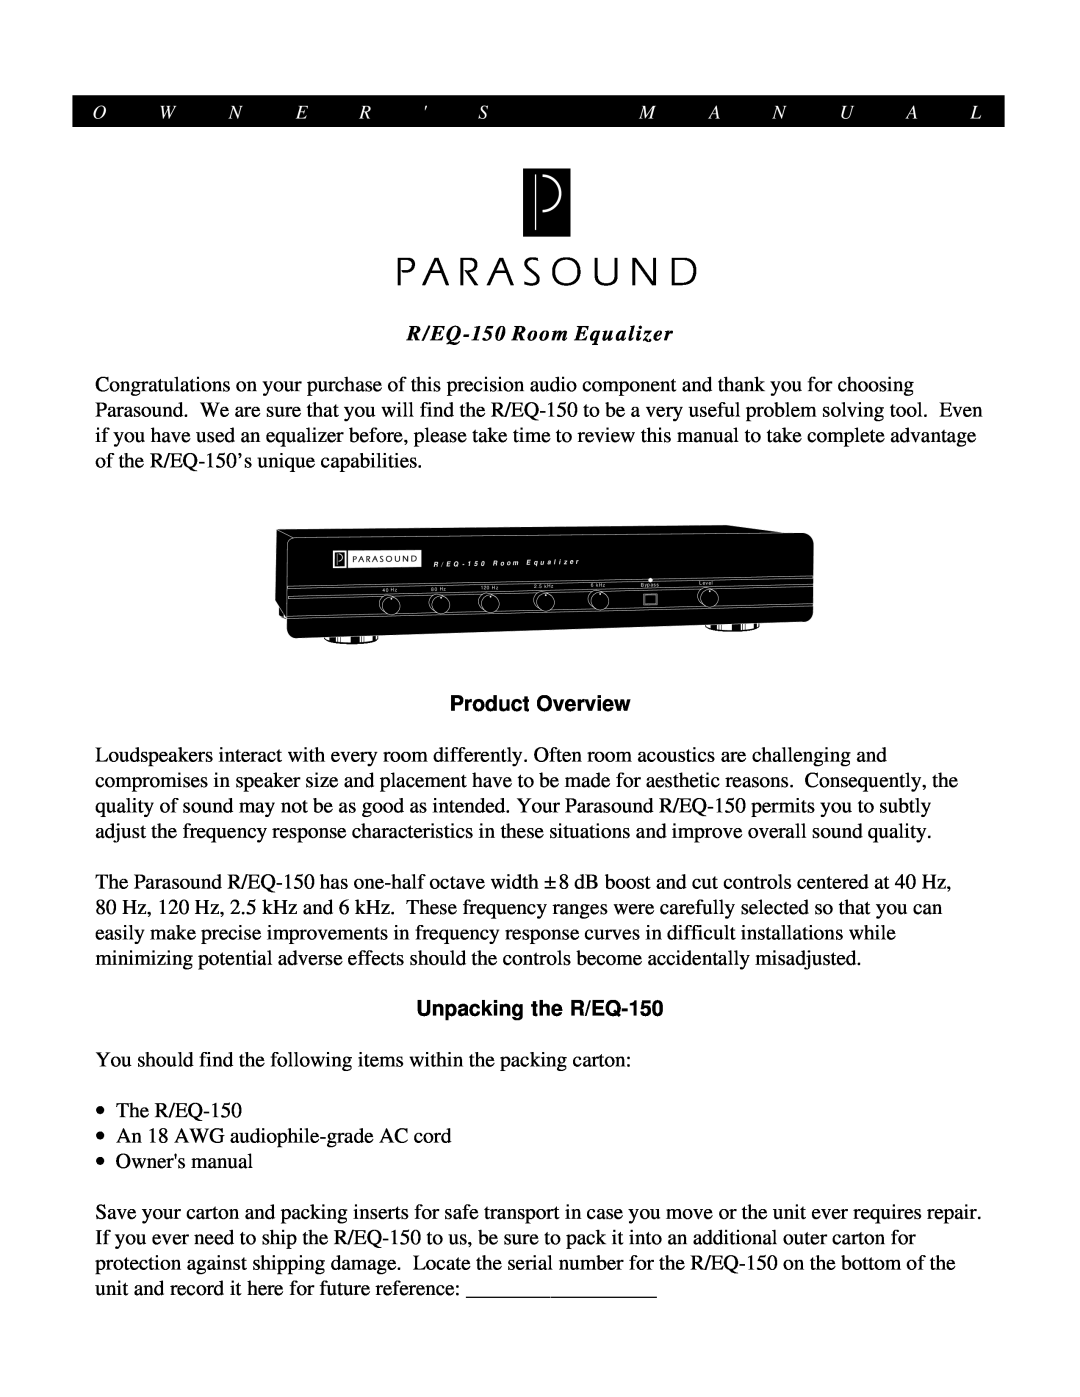 Parasound TDQ-150 owner manual Product Overview, Unpacking the R/EQ-150, O W N E R S, M A N U A L 